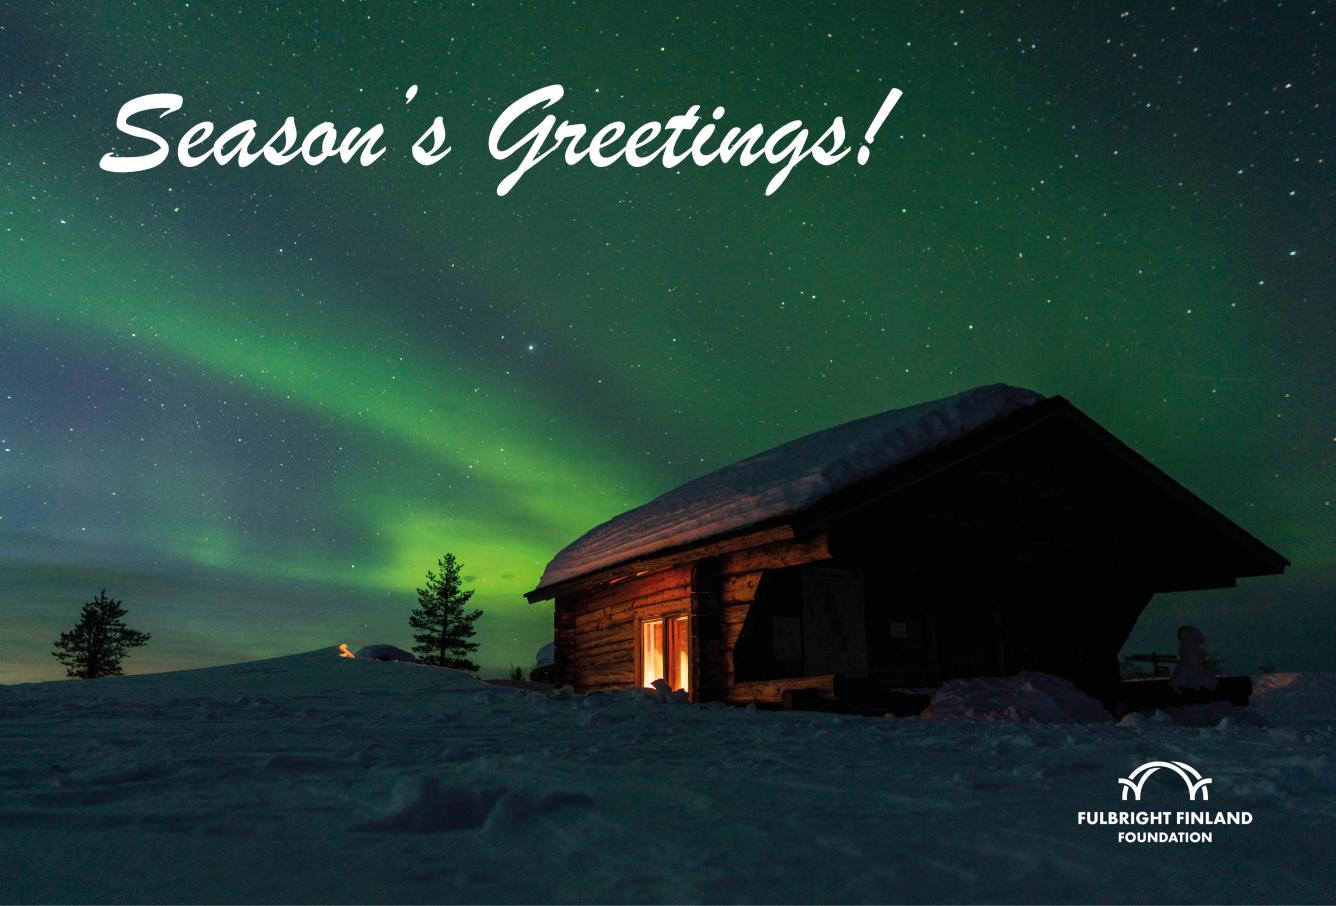 A wintery scene with a cabin on a Finnish fell with green auroras in the sky. In the left corner it says Season's Greetings! and on the bottom right corner there is the Foundation's logo. Photo by Hendrik Mordel on Unsplash